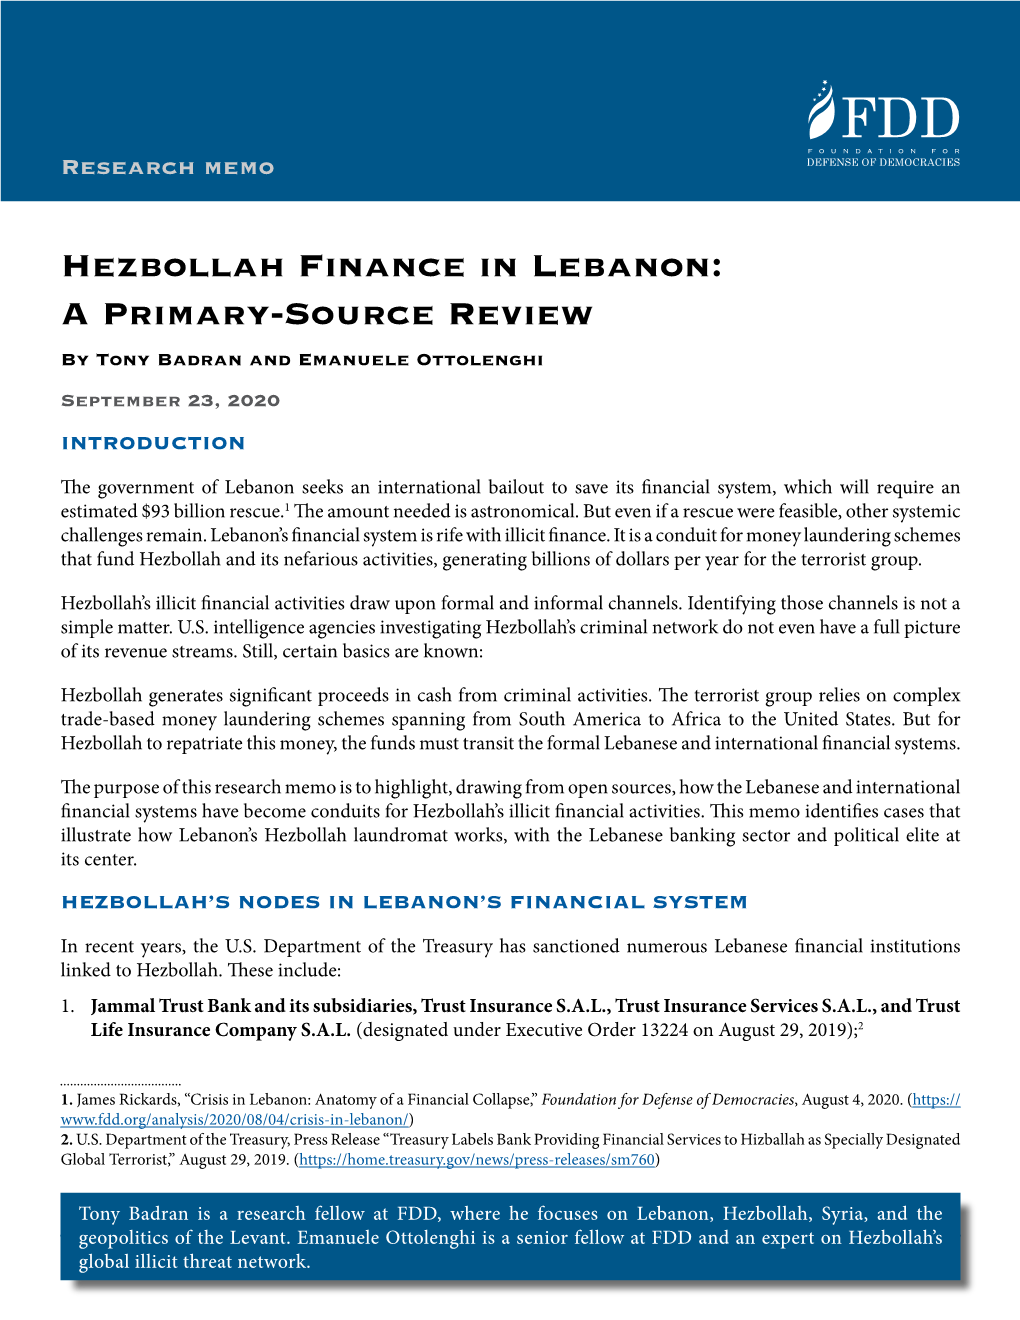 Hezbollah Finance in Lebanon: a Primary-Source Review by Tony Badran and Emanuele Ottolenghi September 23, 2020 INTRODUCTION